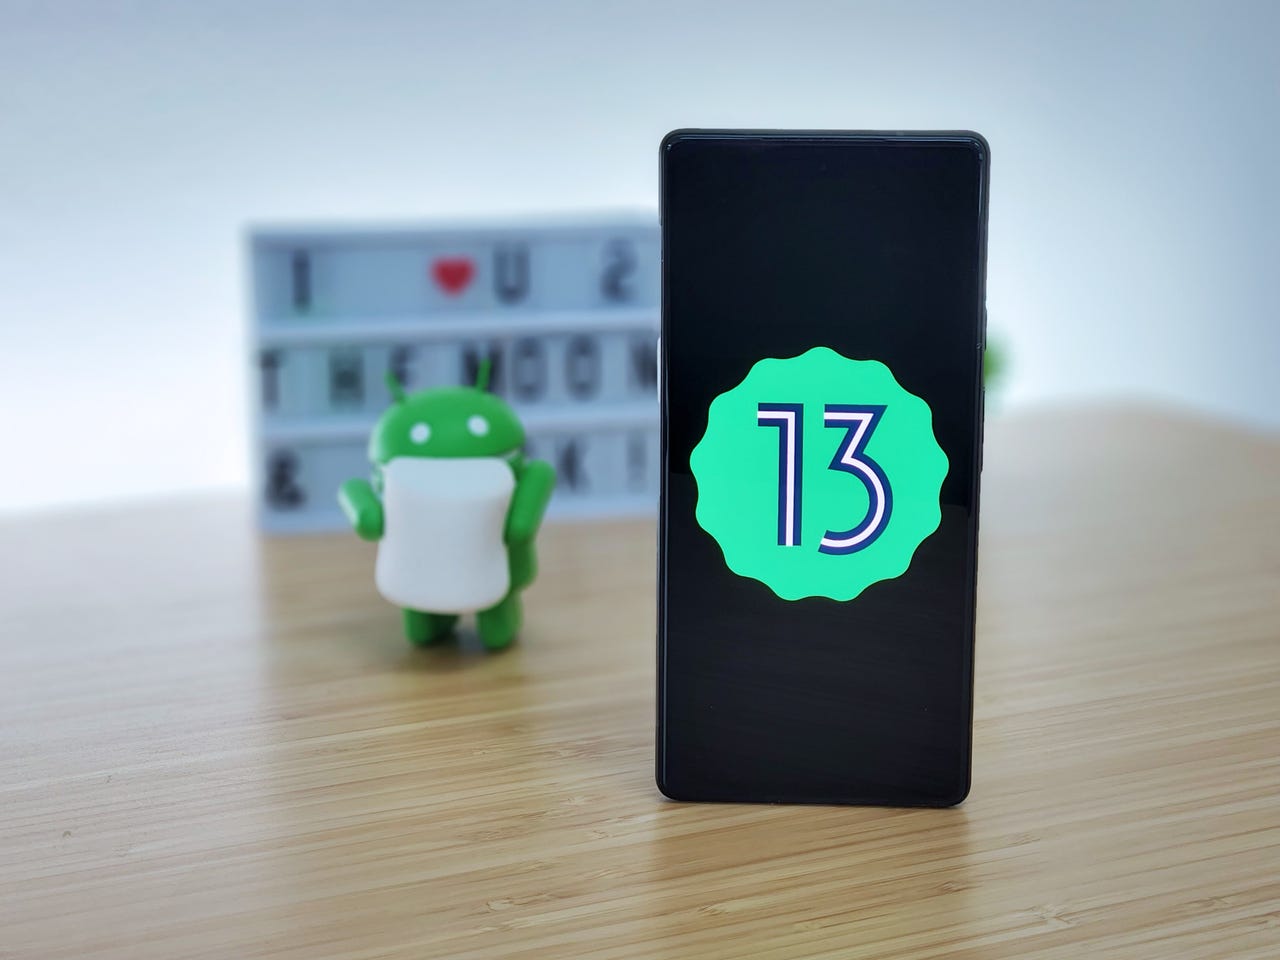 Android 13 logo on a phone on a table with small Android robot in the background.